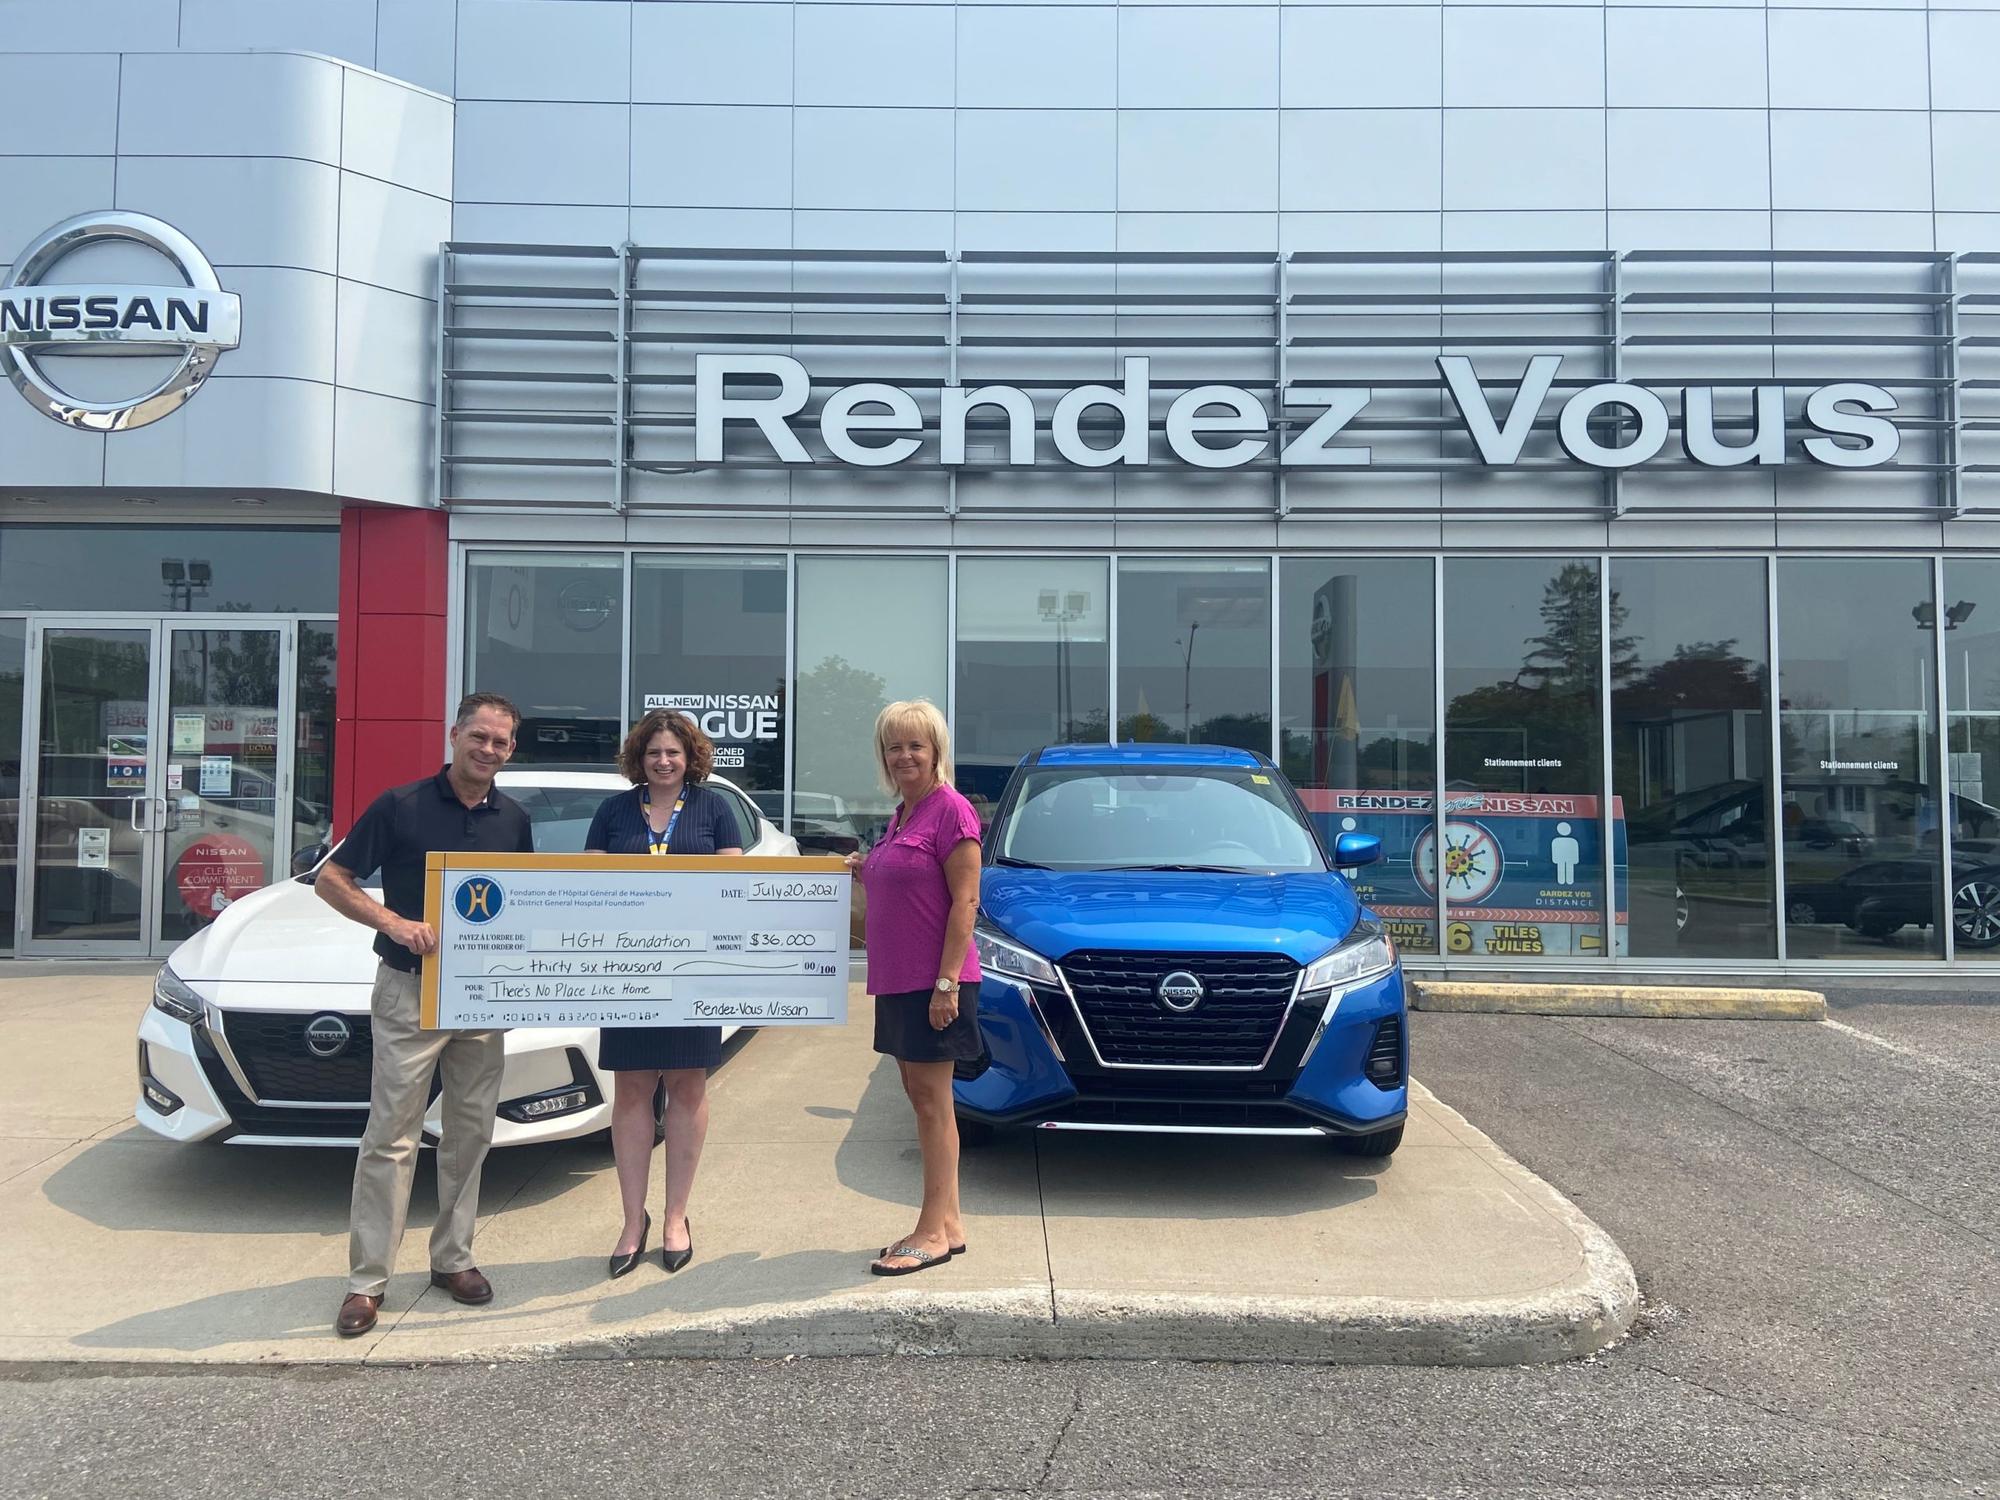 Rendez-Vous Nissan and the Kego Family Donate $36,000 to the HGH Foundation’s new campaign, ‘There’s No Place Like Home’